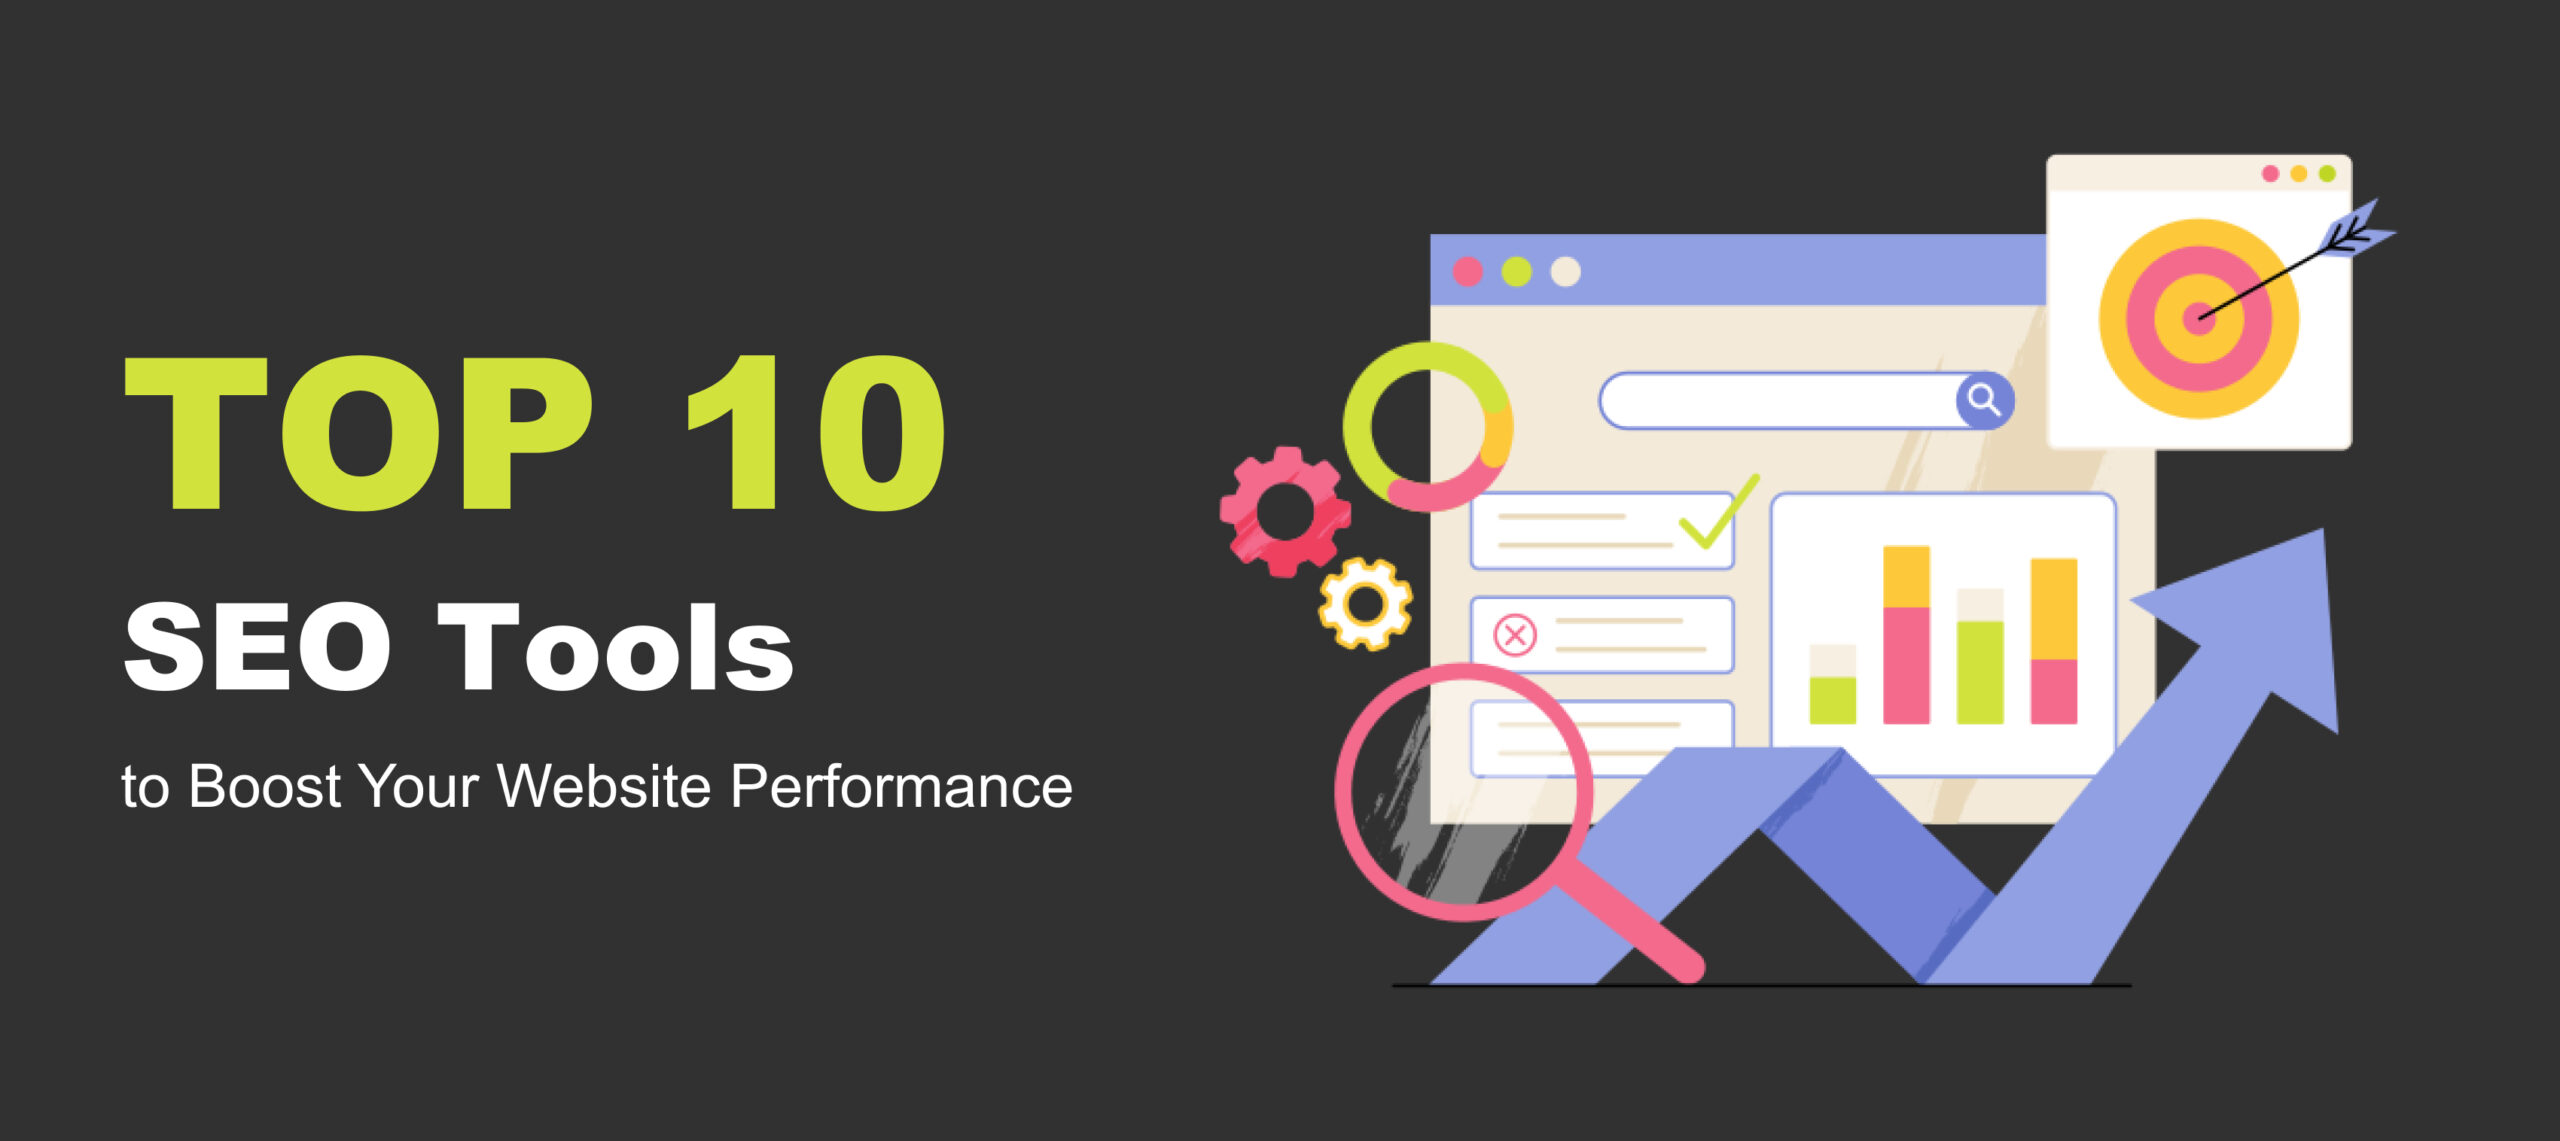  Top 10 SEO Tools to Boost Your Website Performance